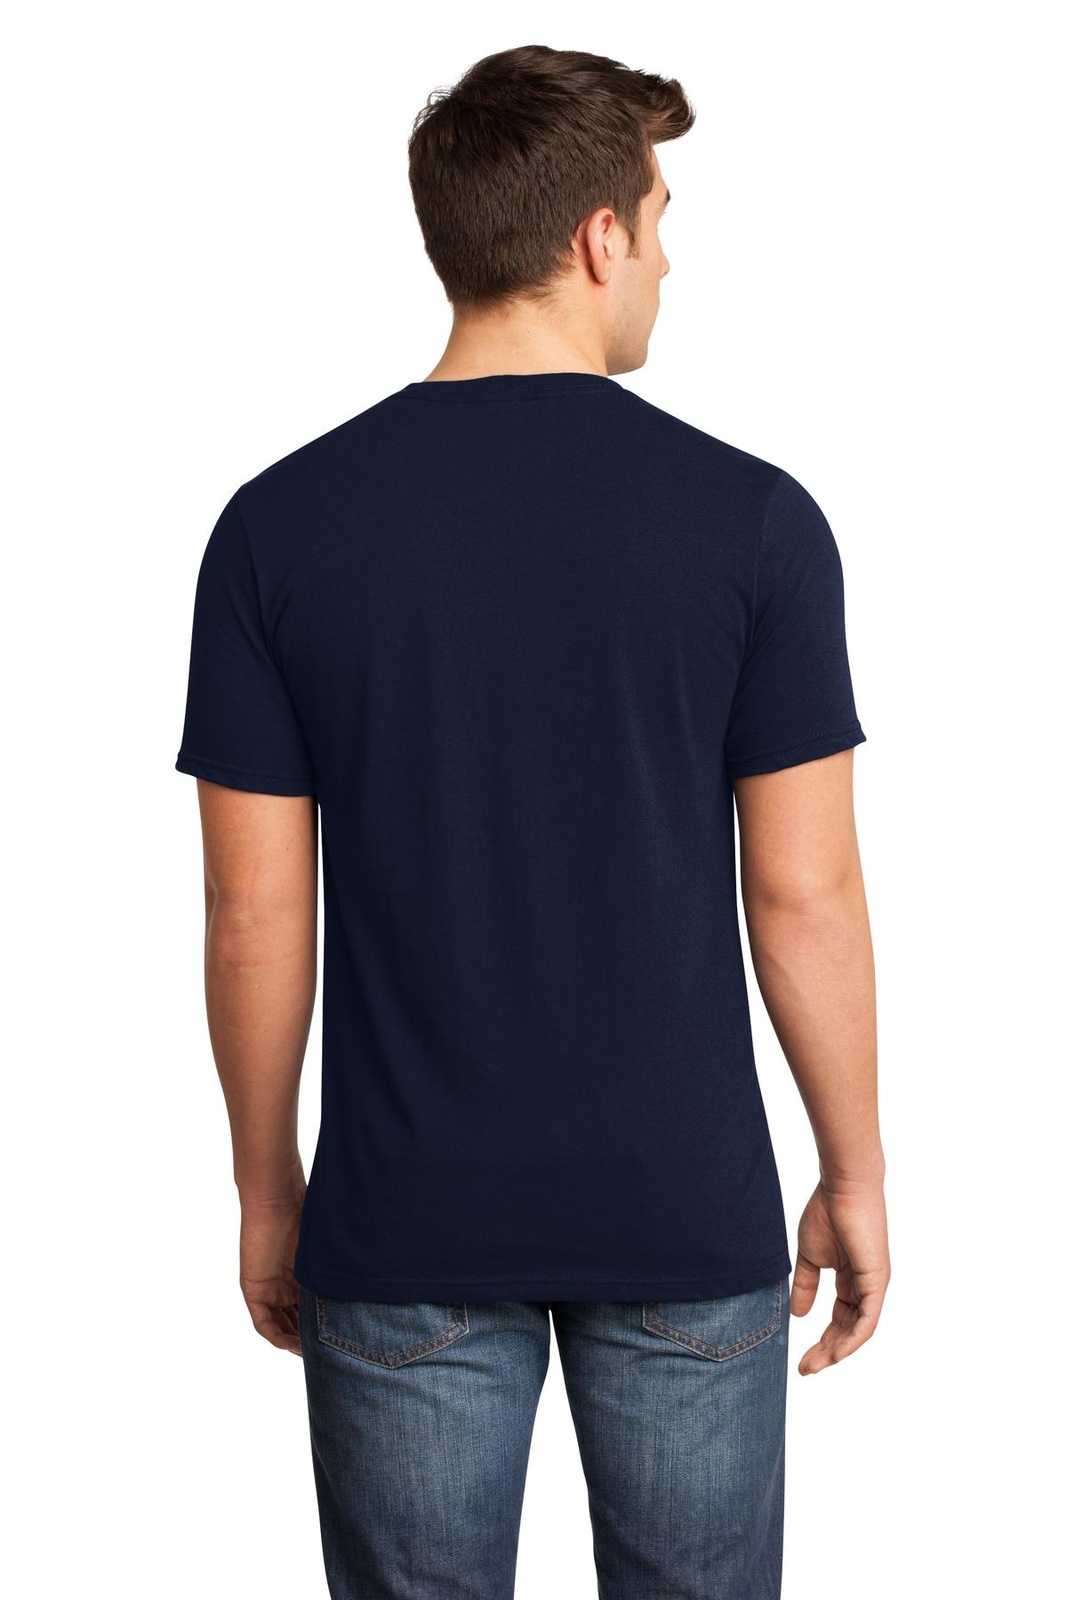 District DT6500 Very Important Tee V-Neck - New Navy - HIT a Double - 2